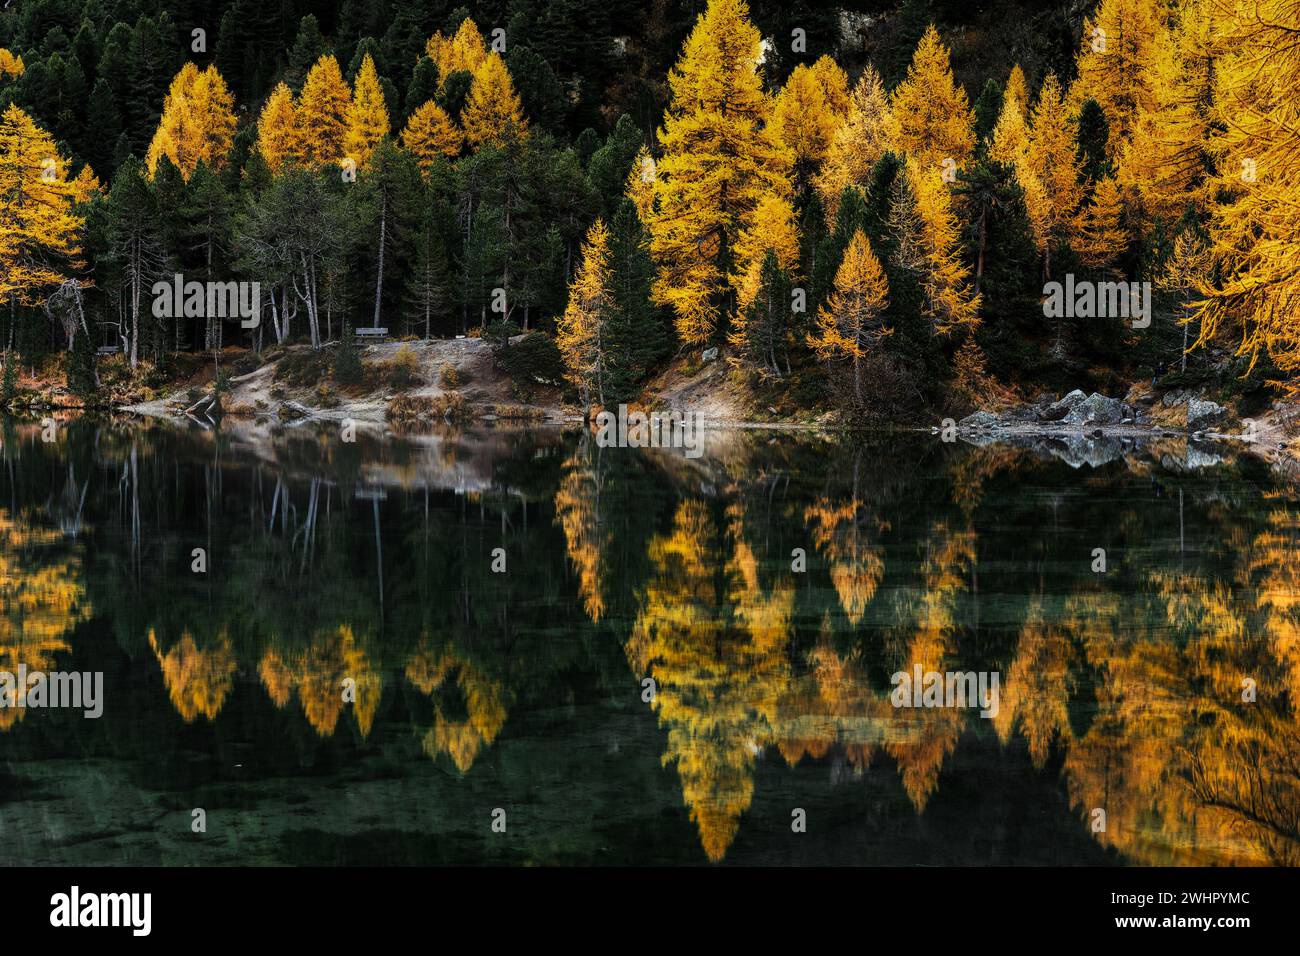 Lake Palpuogna in the Swiss Alps with yellow larch trees and reflections Stock Photo